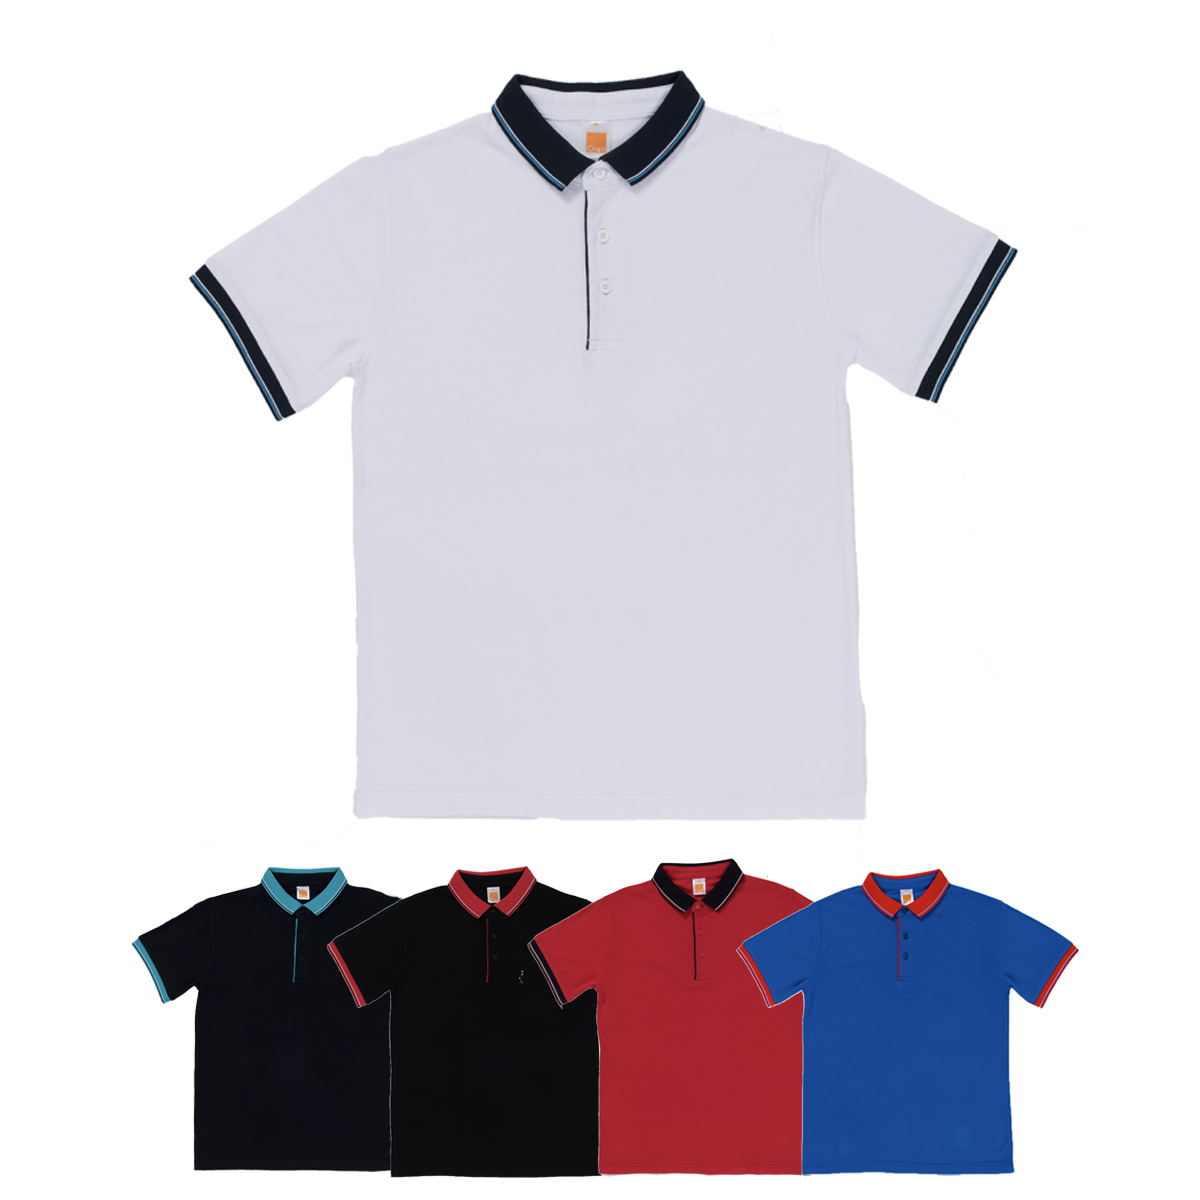 Full Color Honeycomb Polo T-Shirt